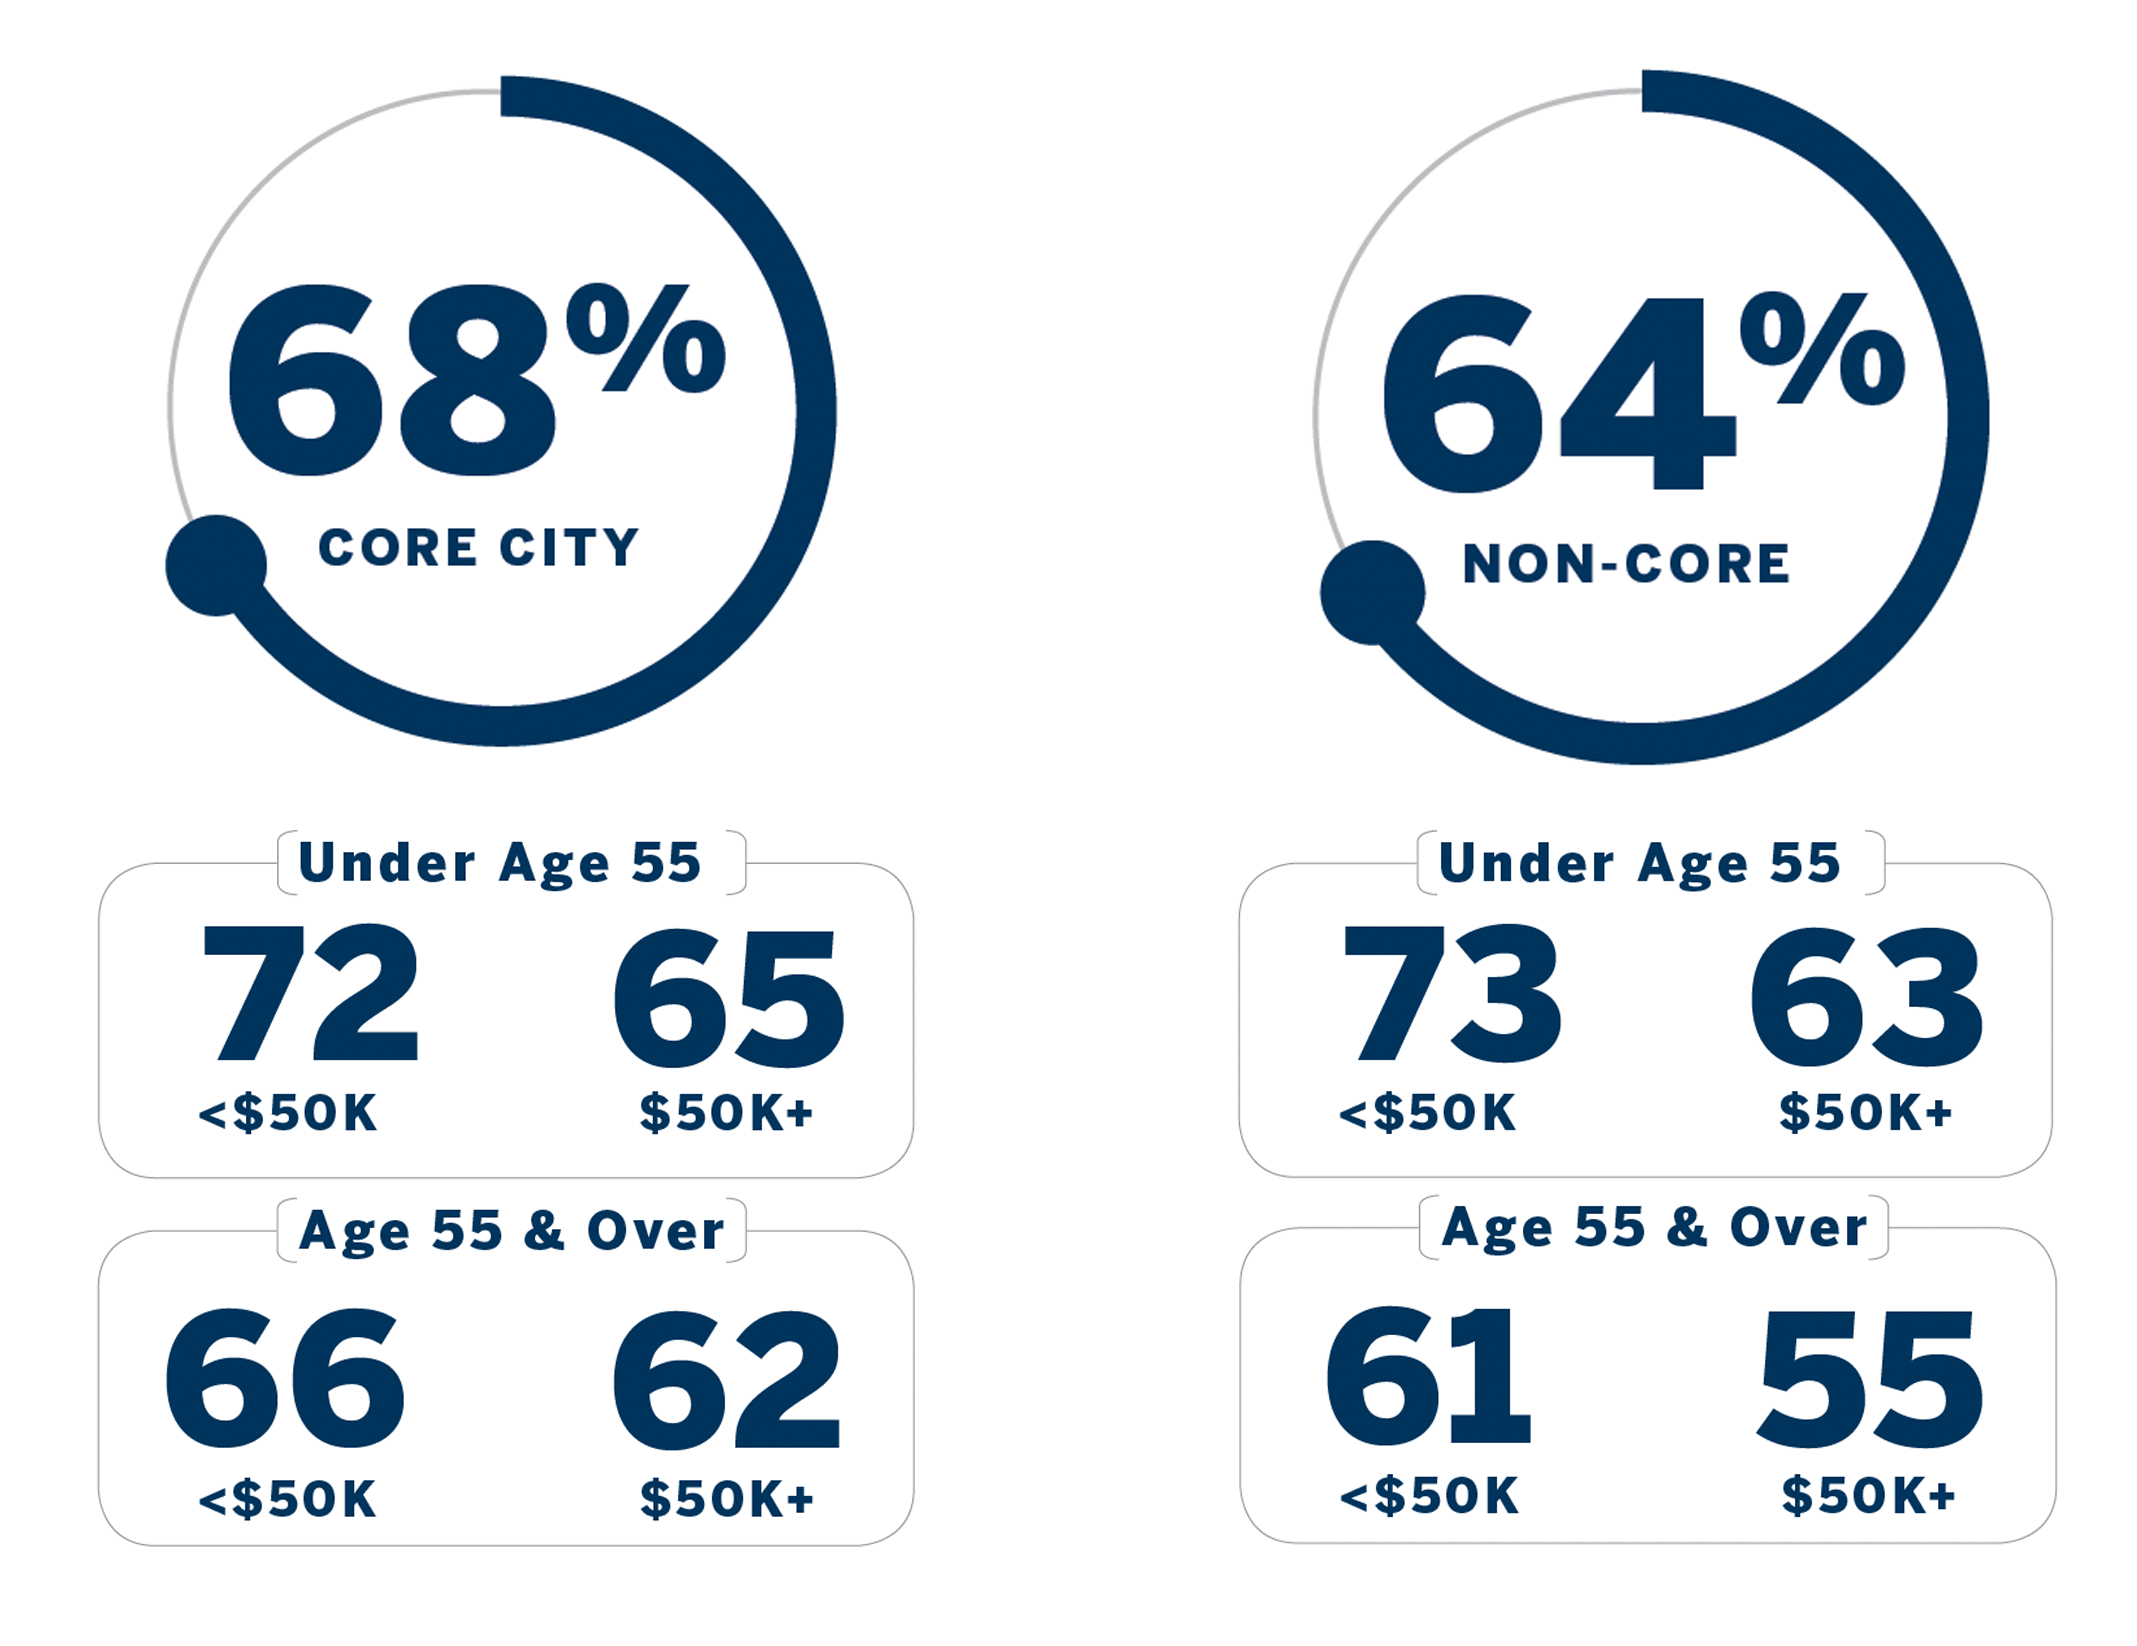 Chart breakdown: Core City: 68% (broken down by ages less than and over 55) Non-Core: 64% (broken down by ages less than and over 55)